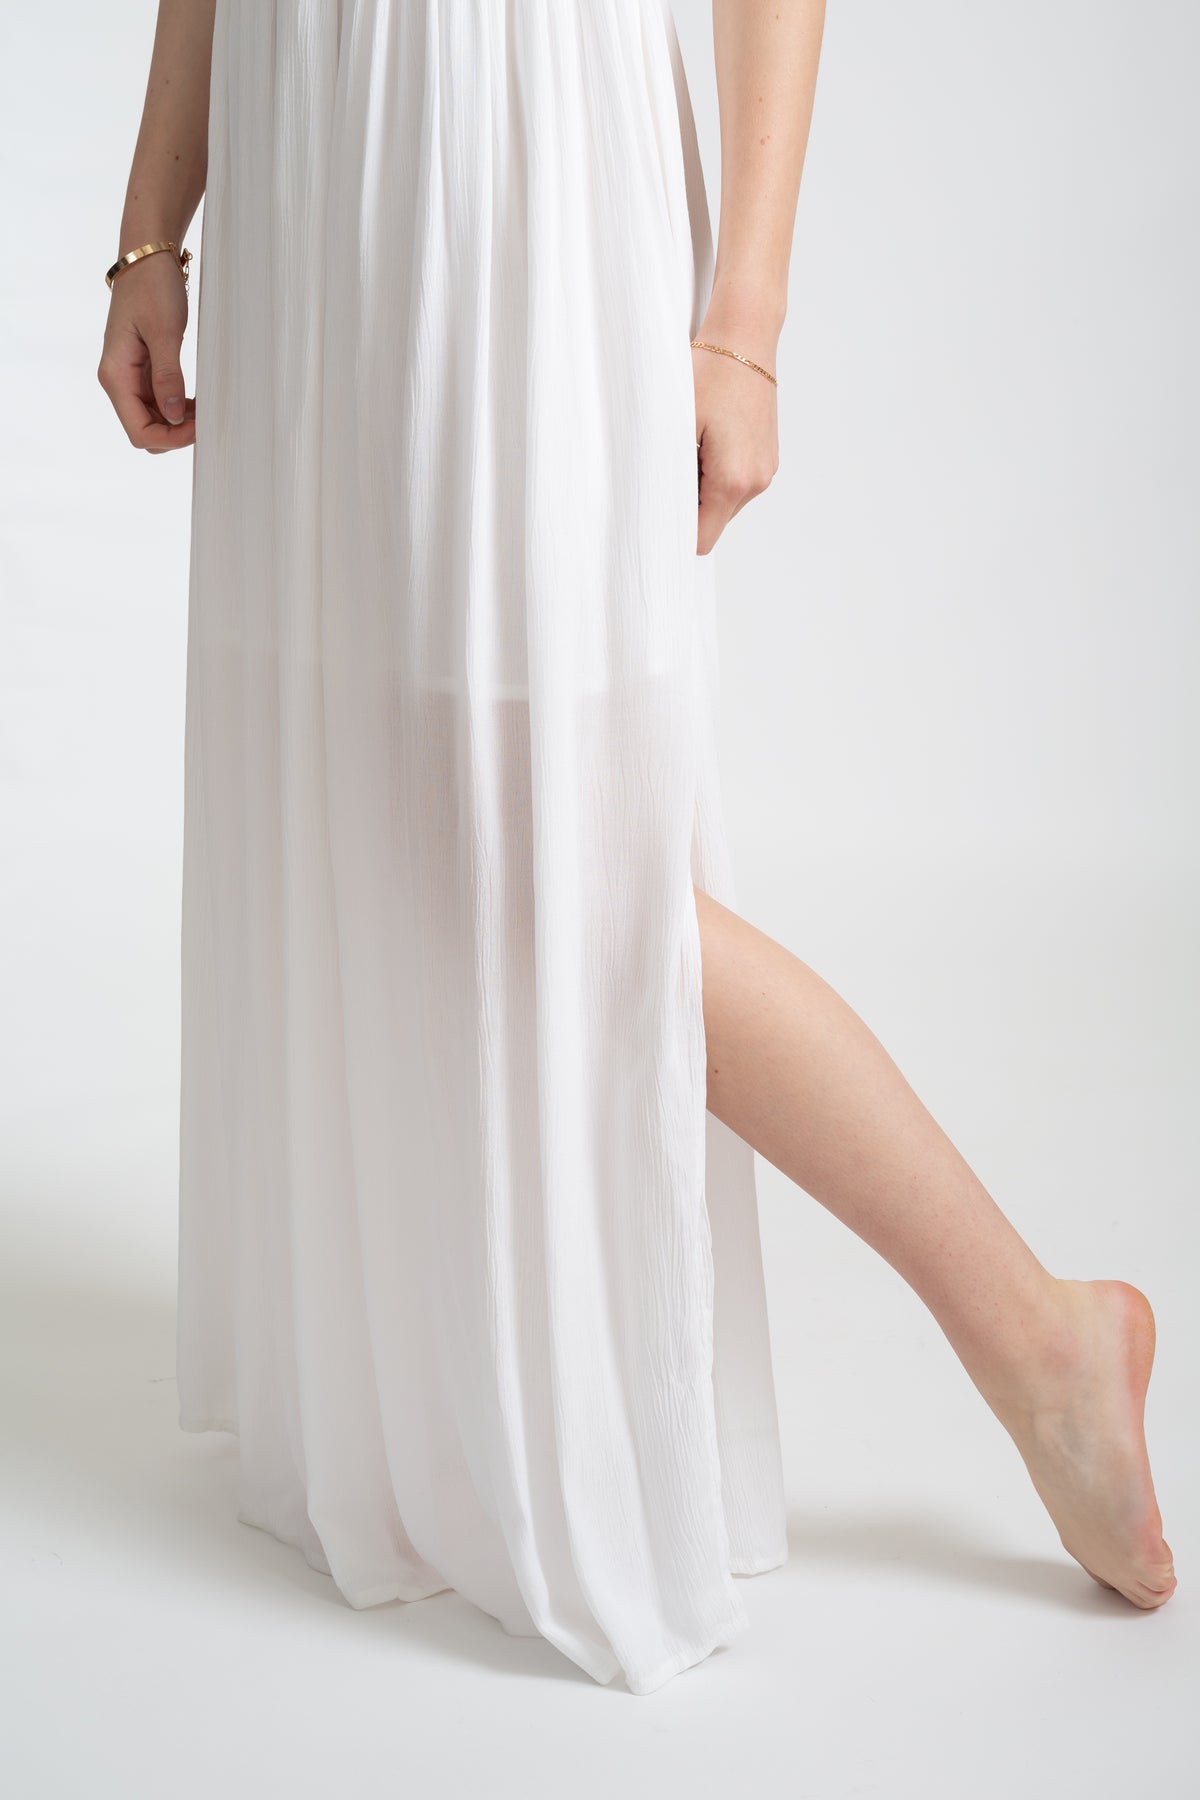 The white Miami maxi bandeau dress with the slit detail by Koy Resort Summer collection facing front close up.